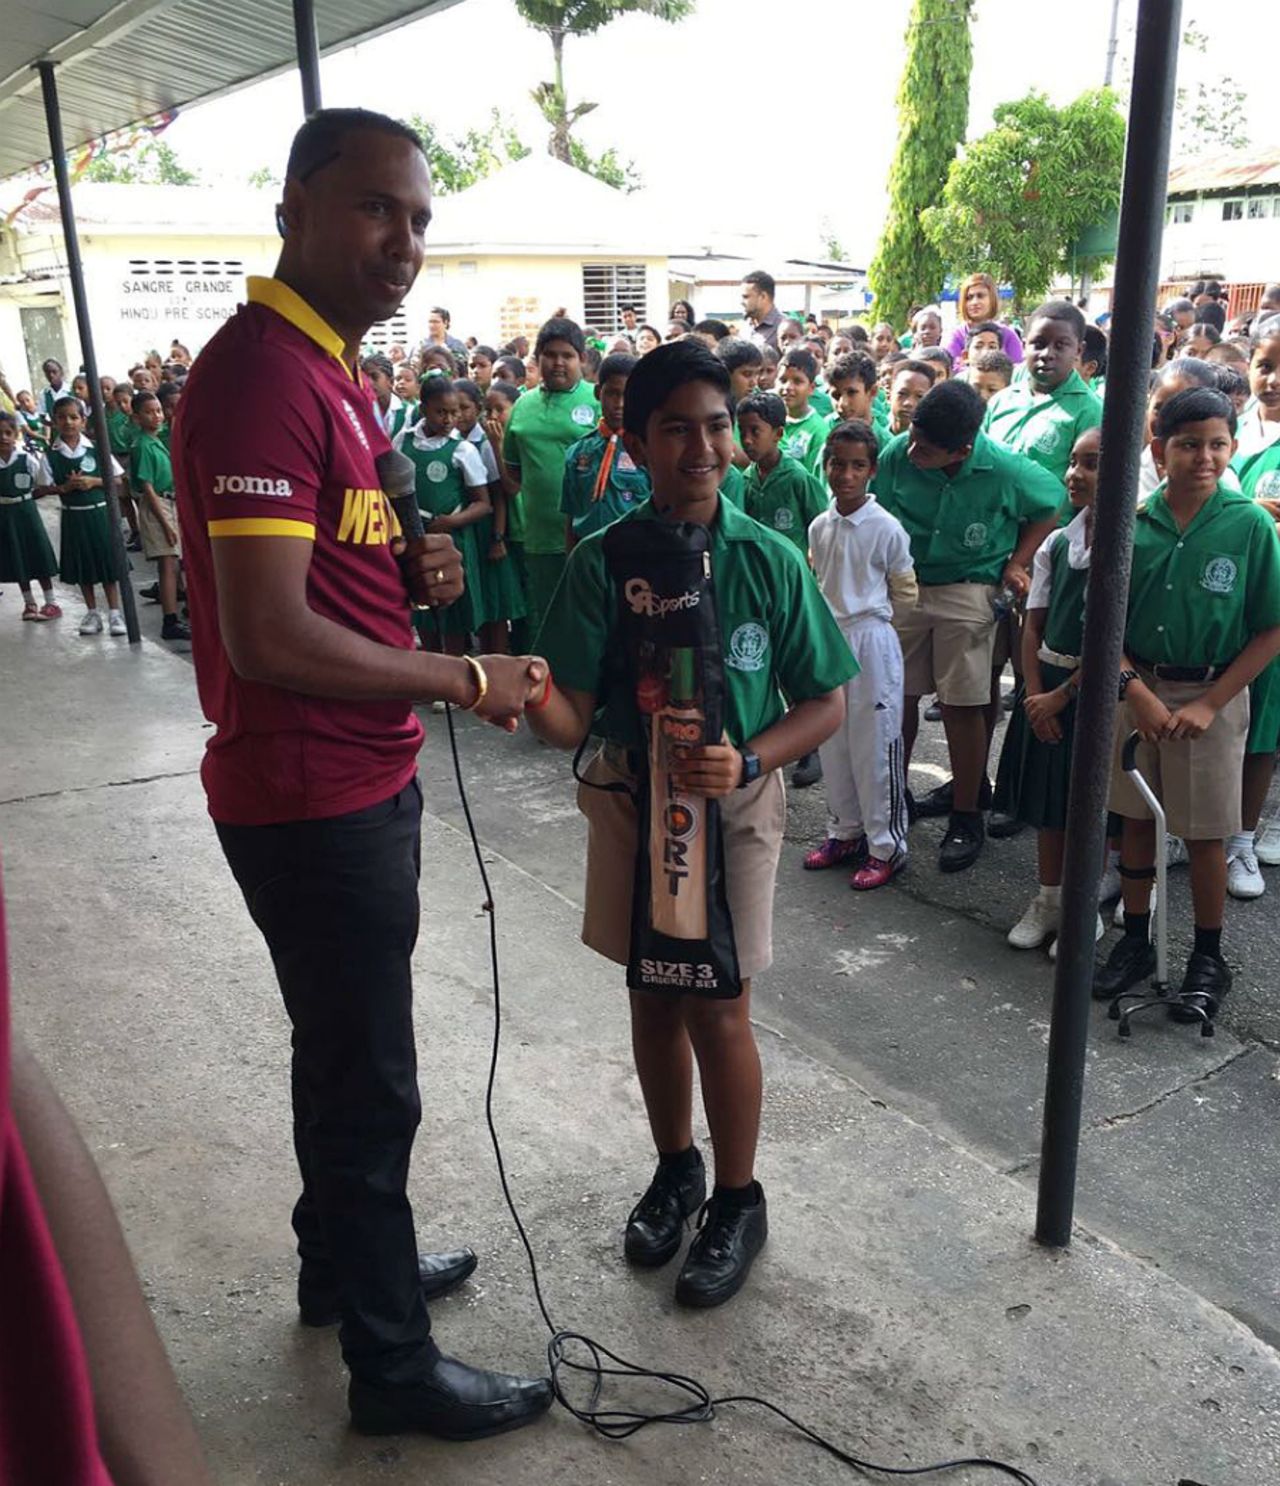 Samuel Badree interacts with schoolchildren in Trinidad as part of the Champions Schools Tour 2016, which aims to motivate kids and provide them with positive role models, May 26, 2016